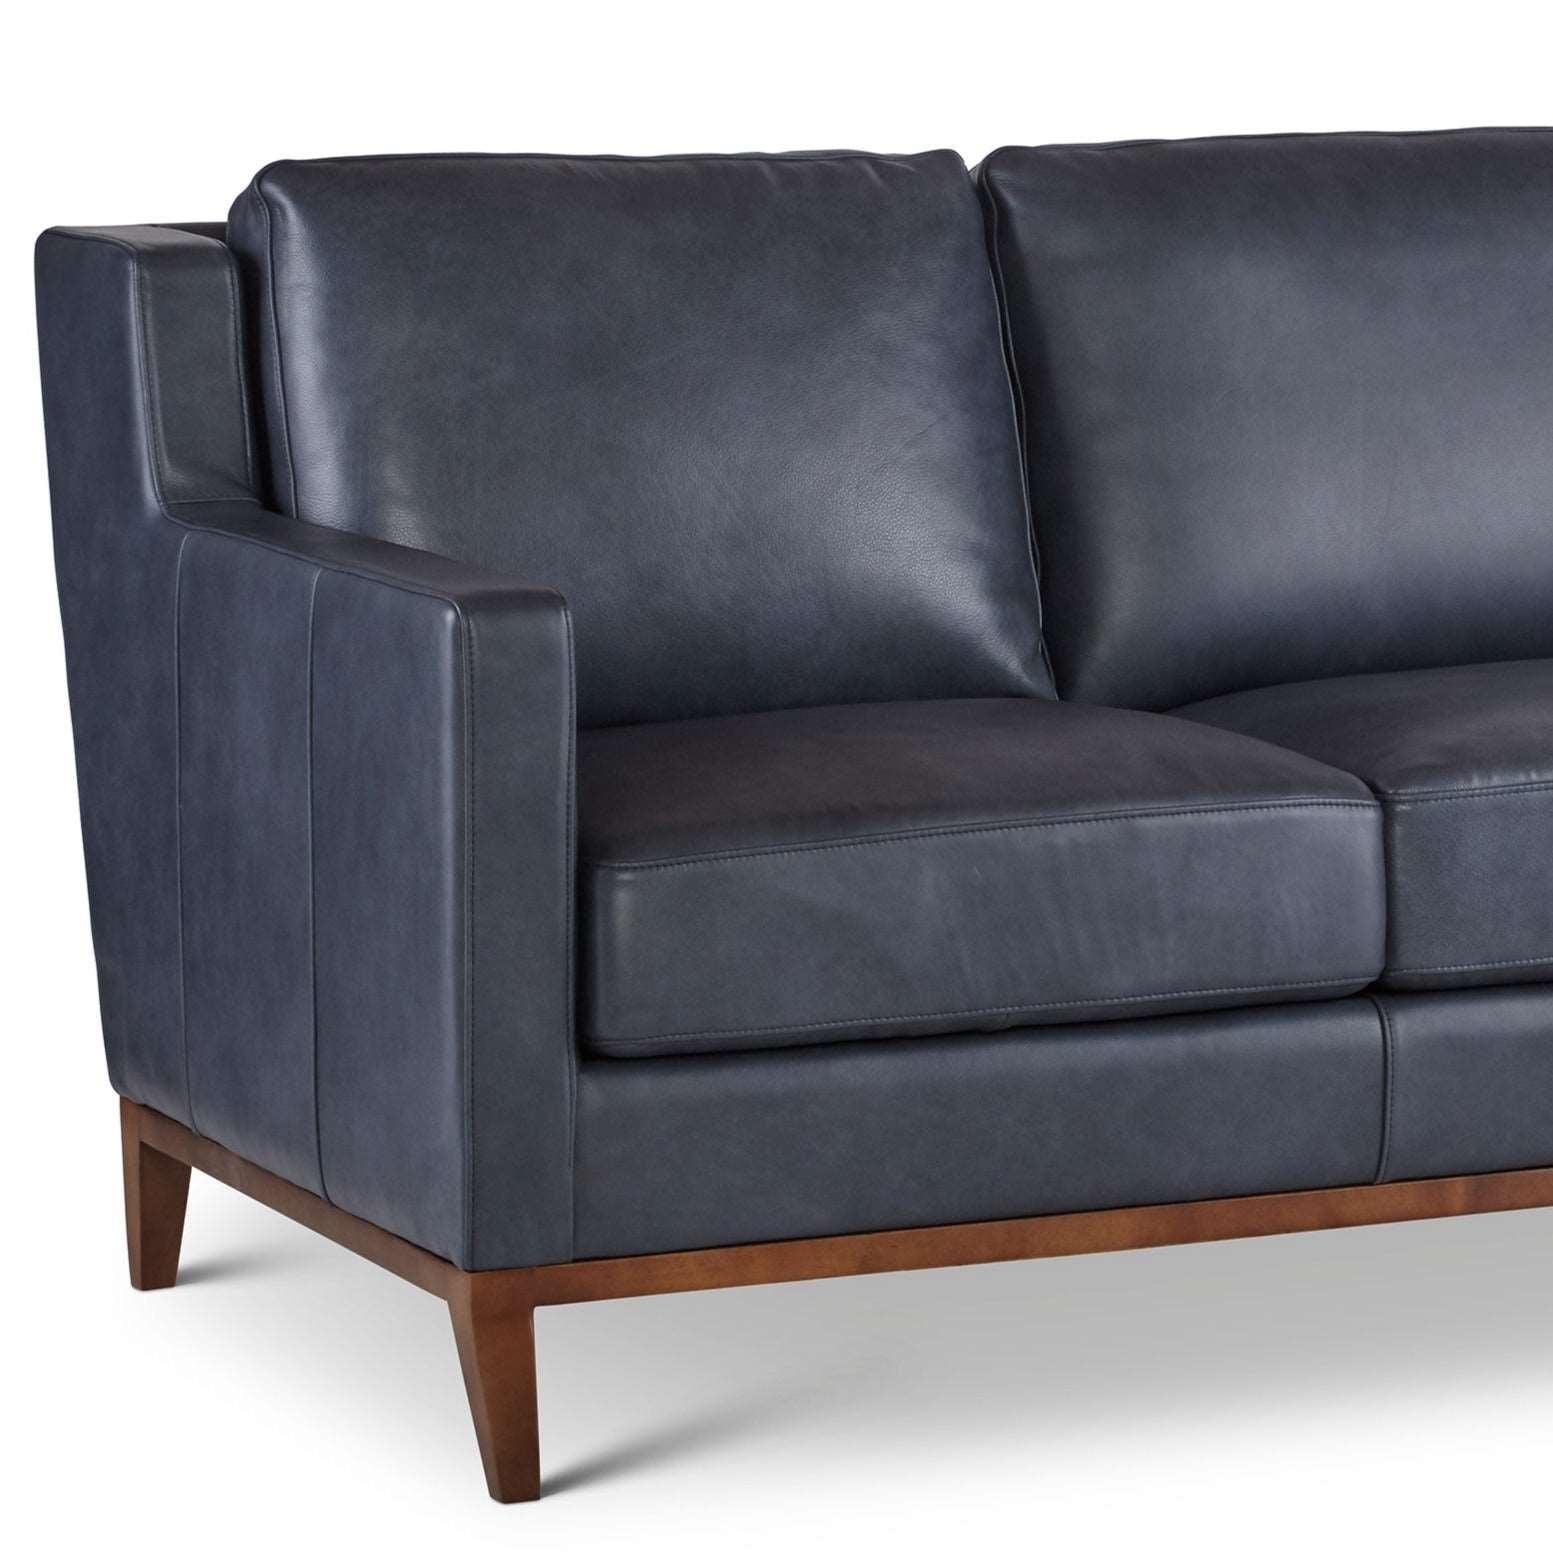 Anders Leather Sofa Handcrafted and Made to Order - Uptown Sebastian